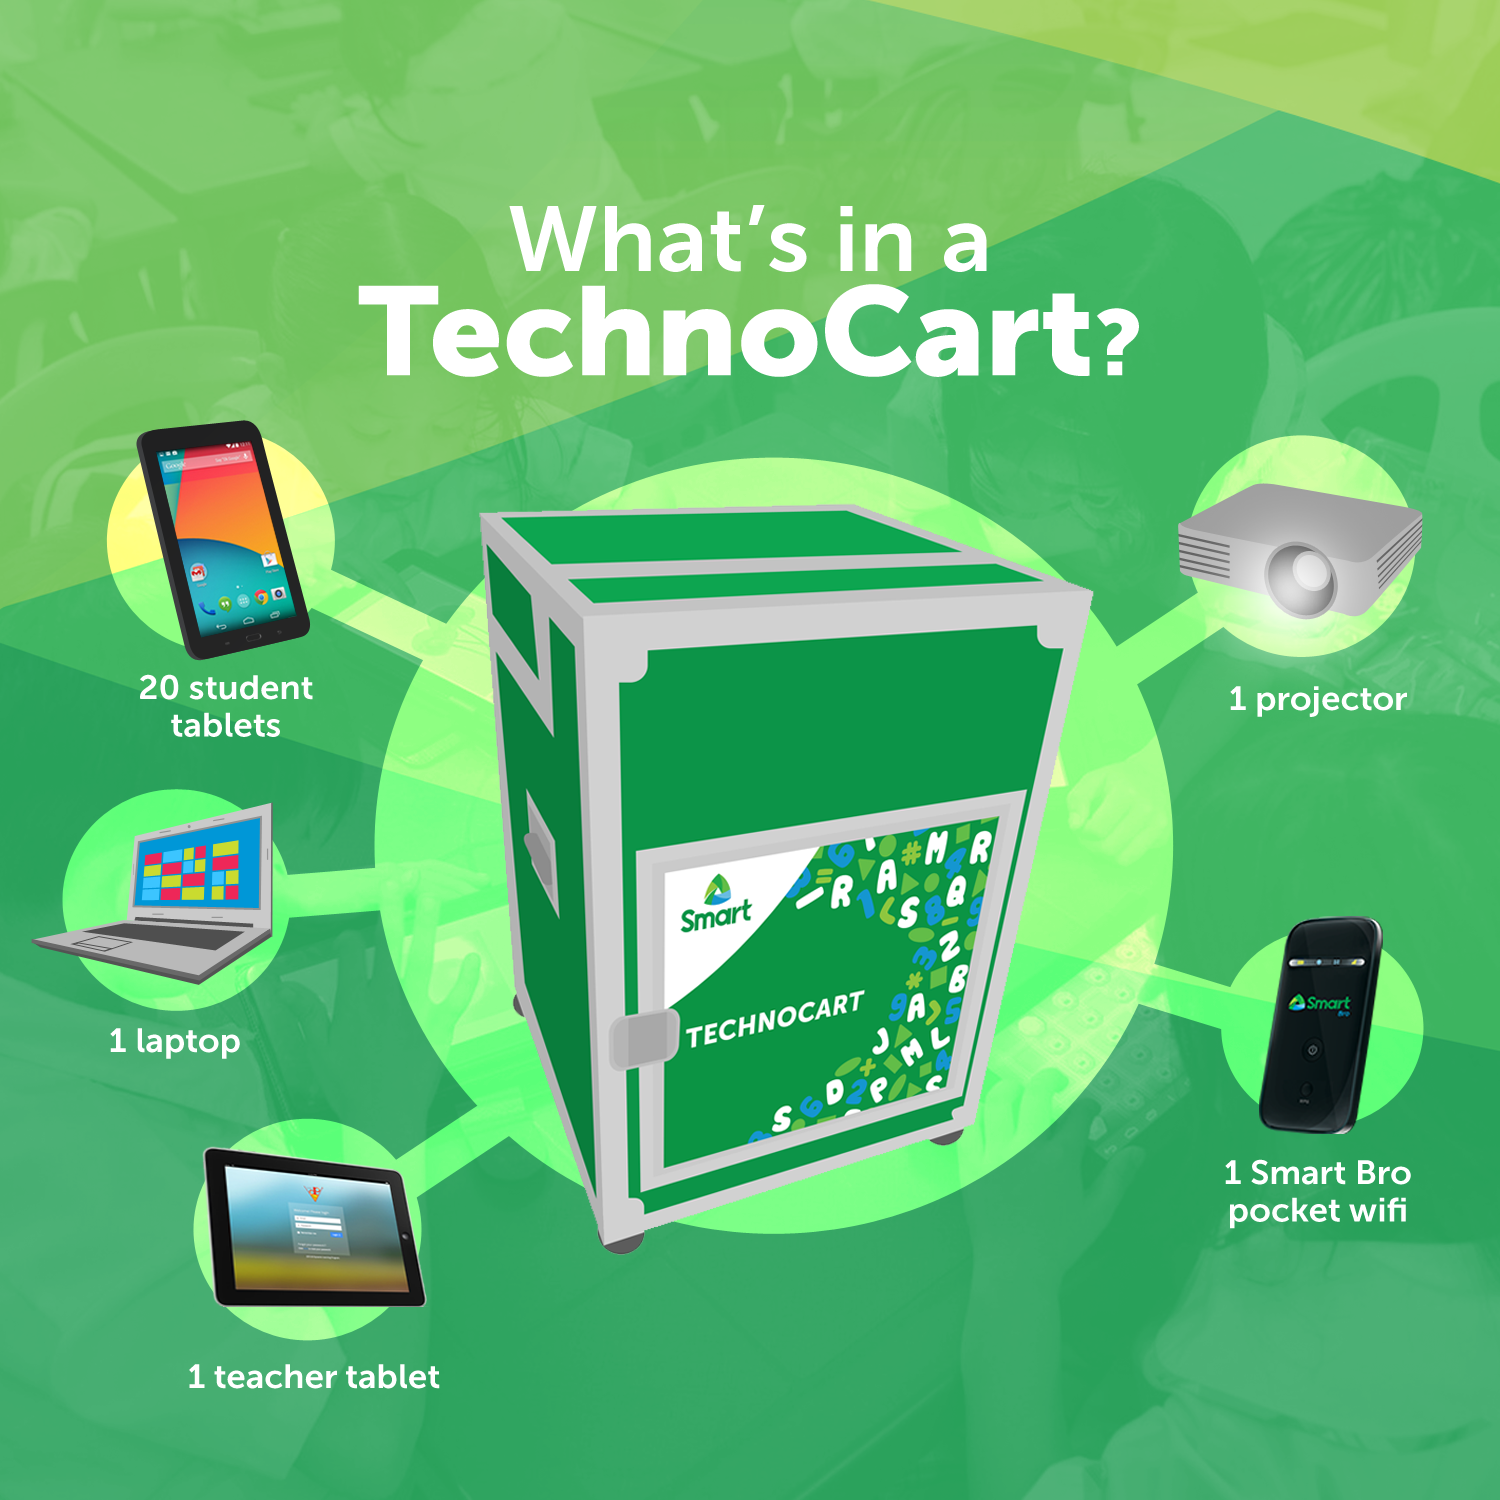 what's in a technocart